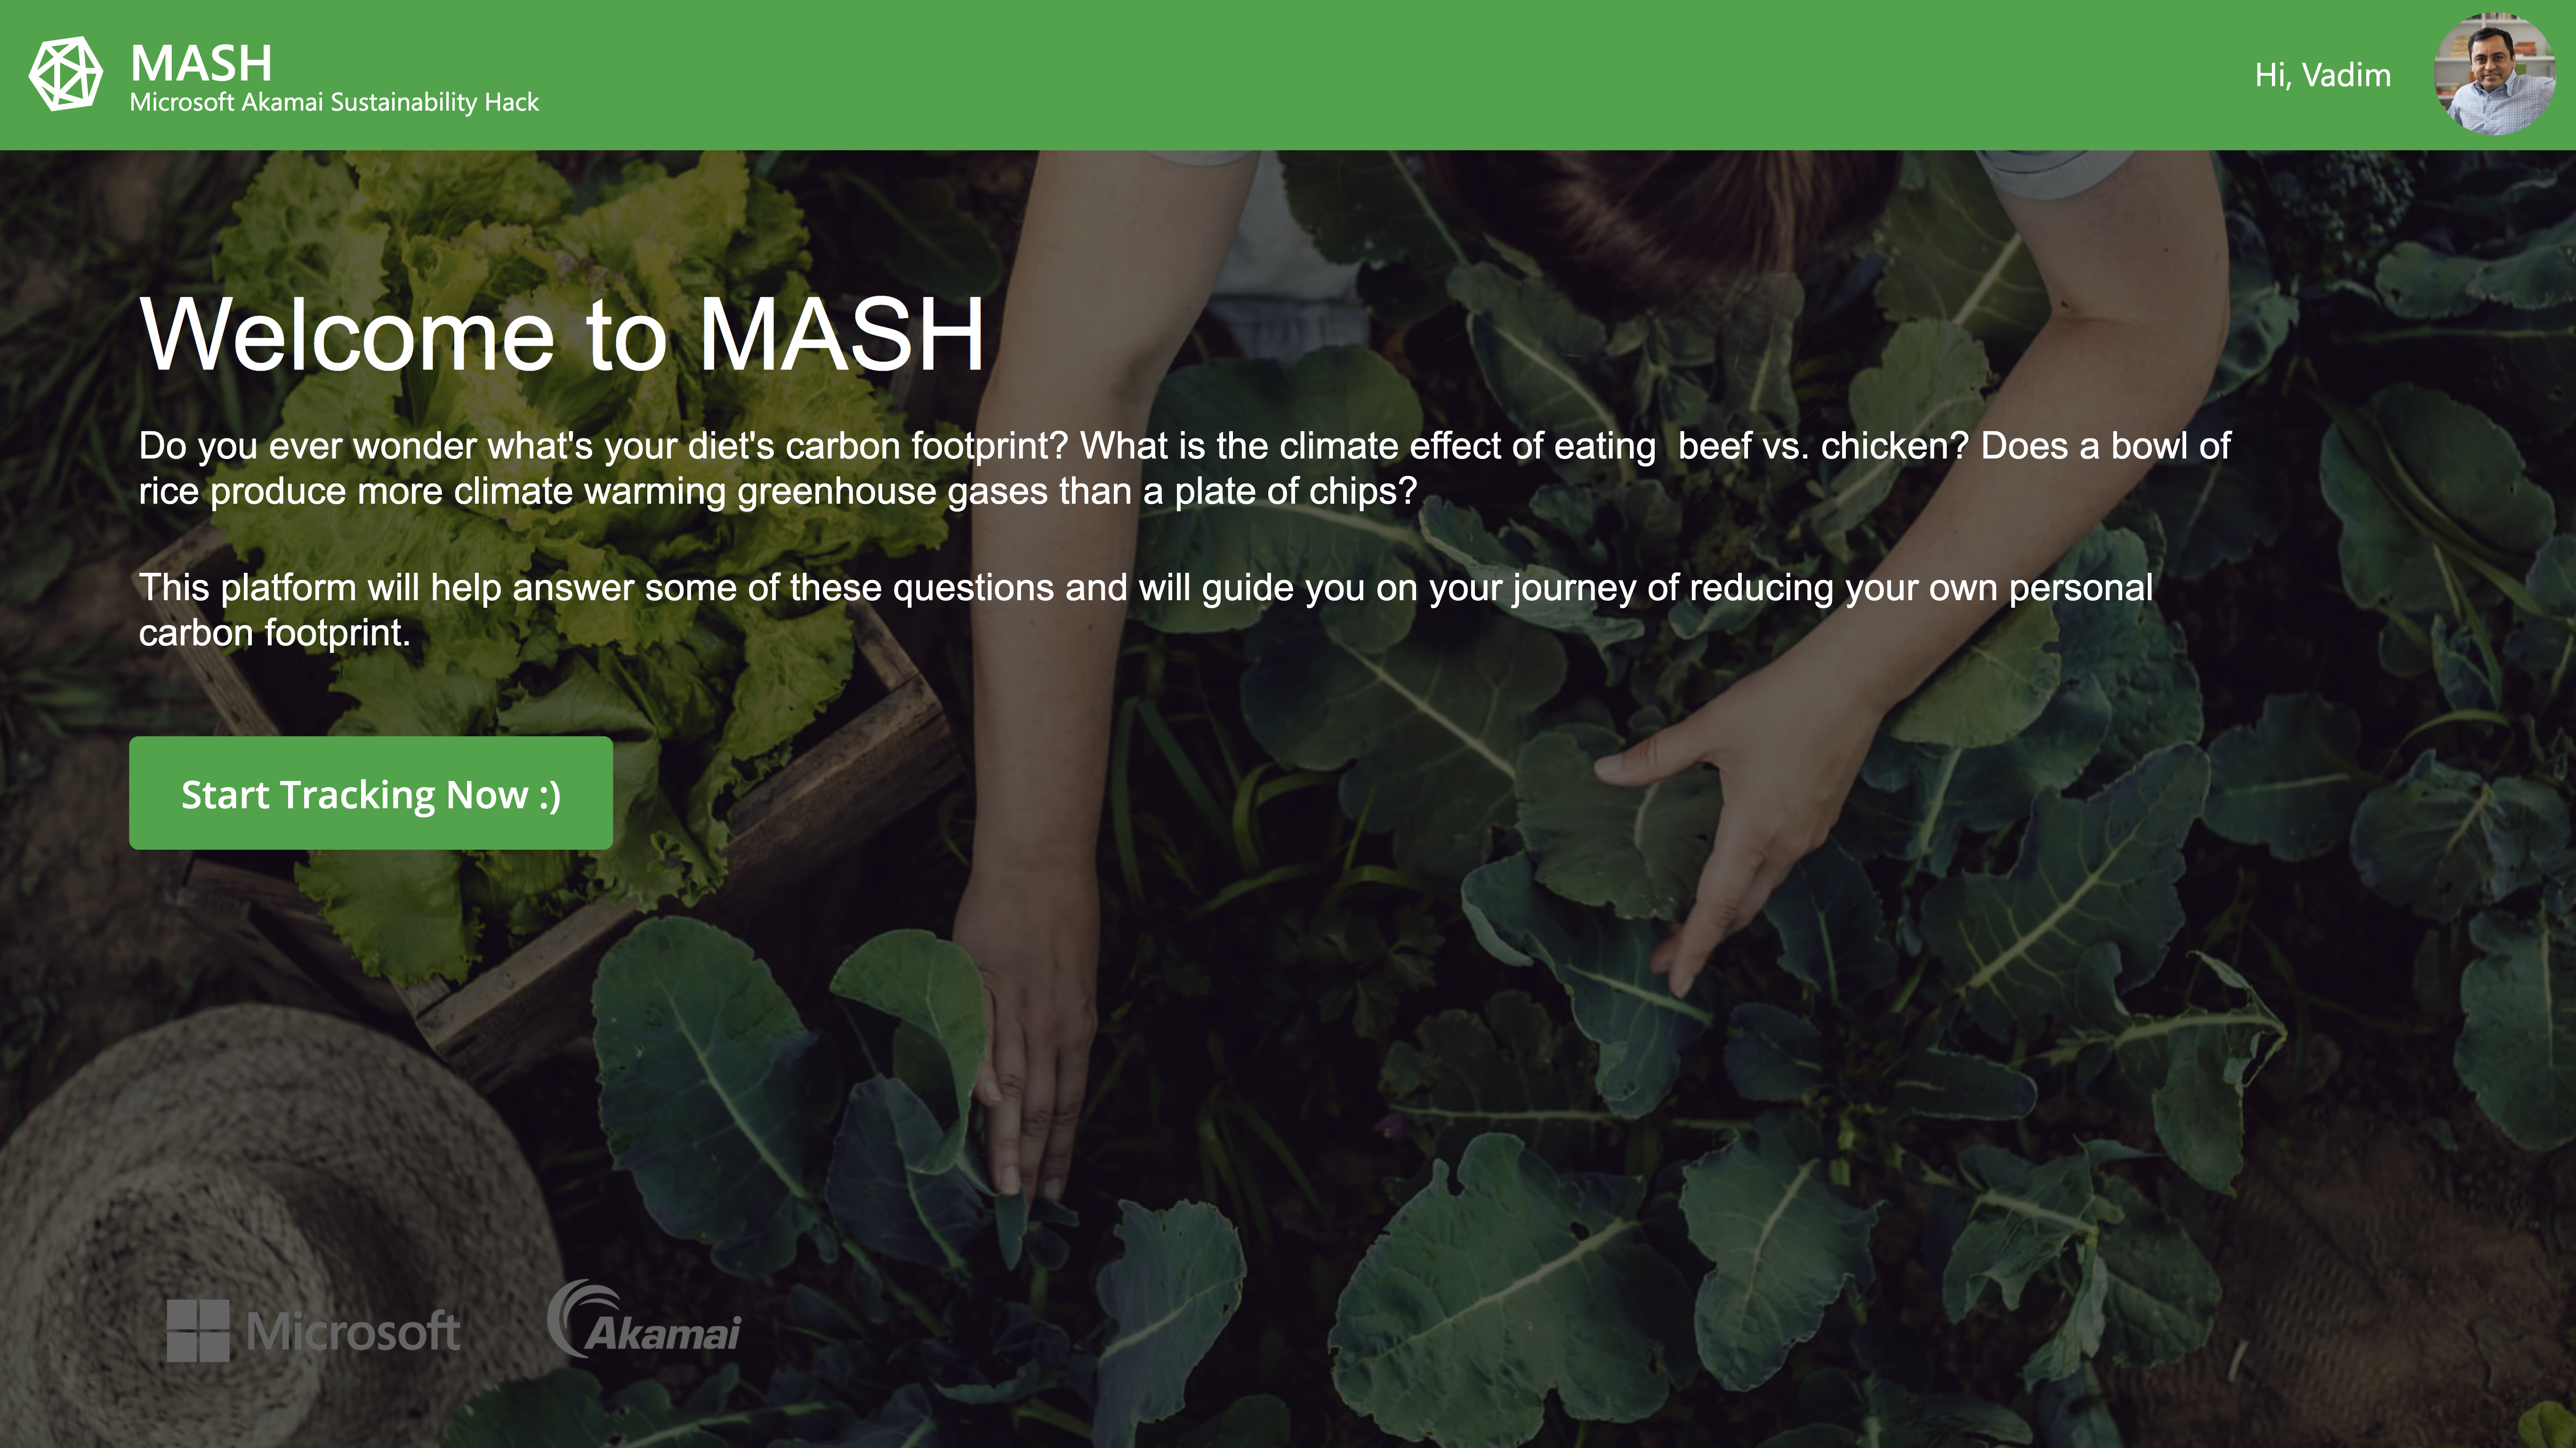 MASH app reads "Welcome to MASH."